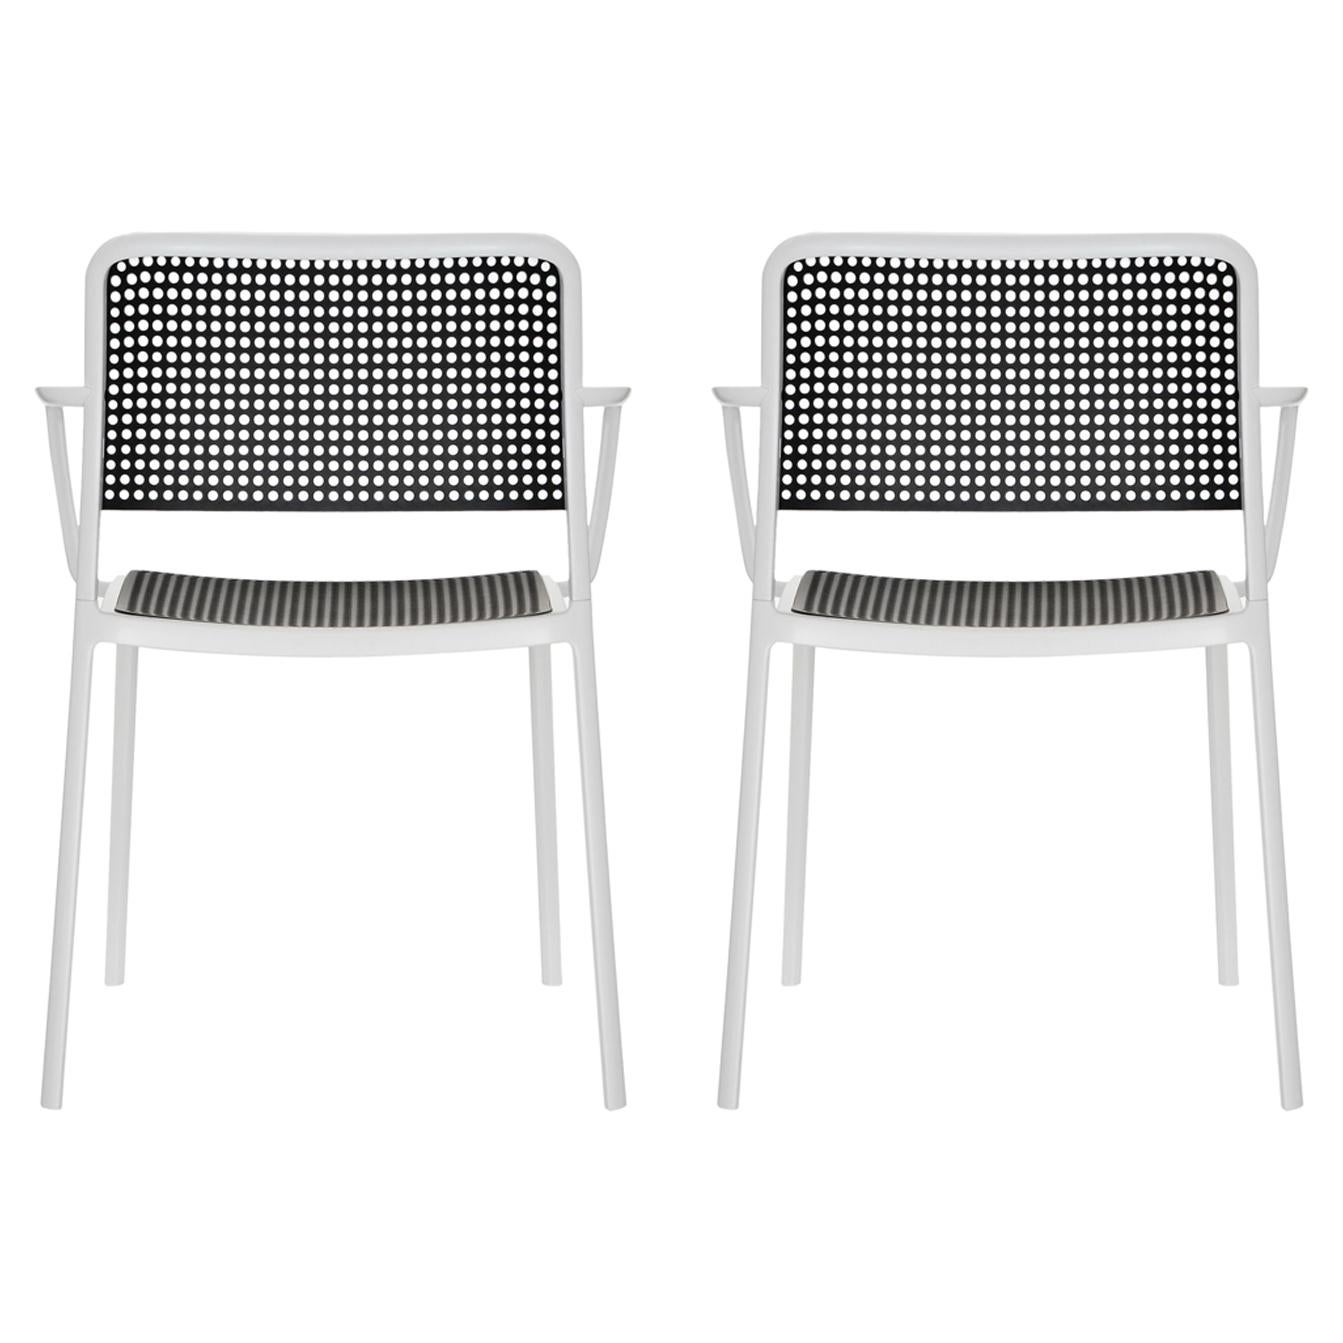 Set of 2 Kartell Audrey Chair by Piero Lissoni in Black & White